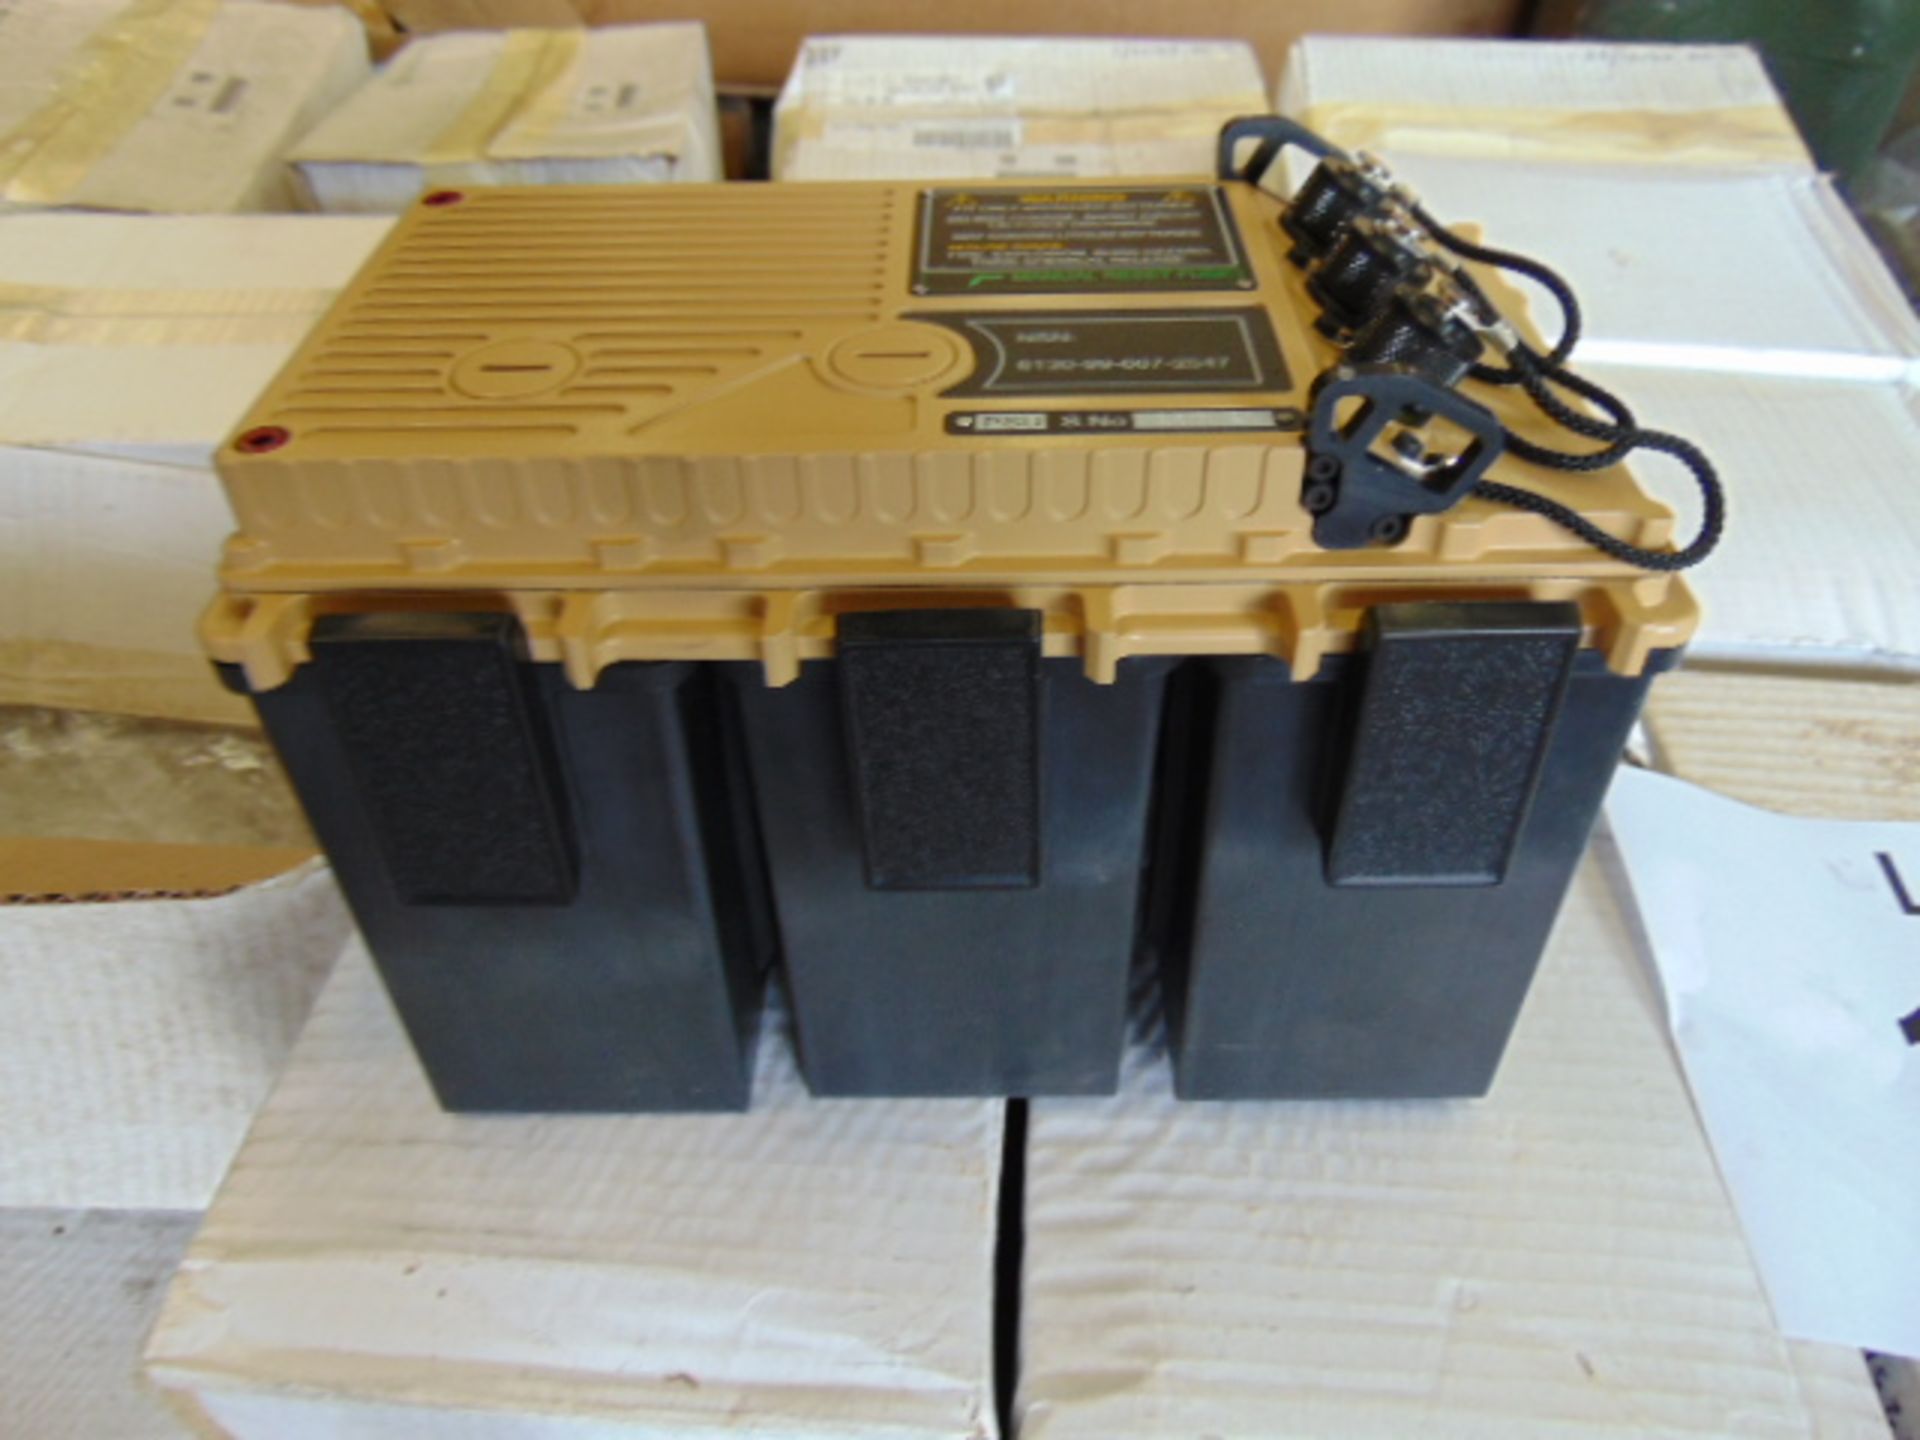 29 x New Unissued Battery Chargers as Shown - Image 4 of 4